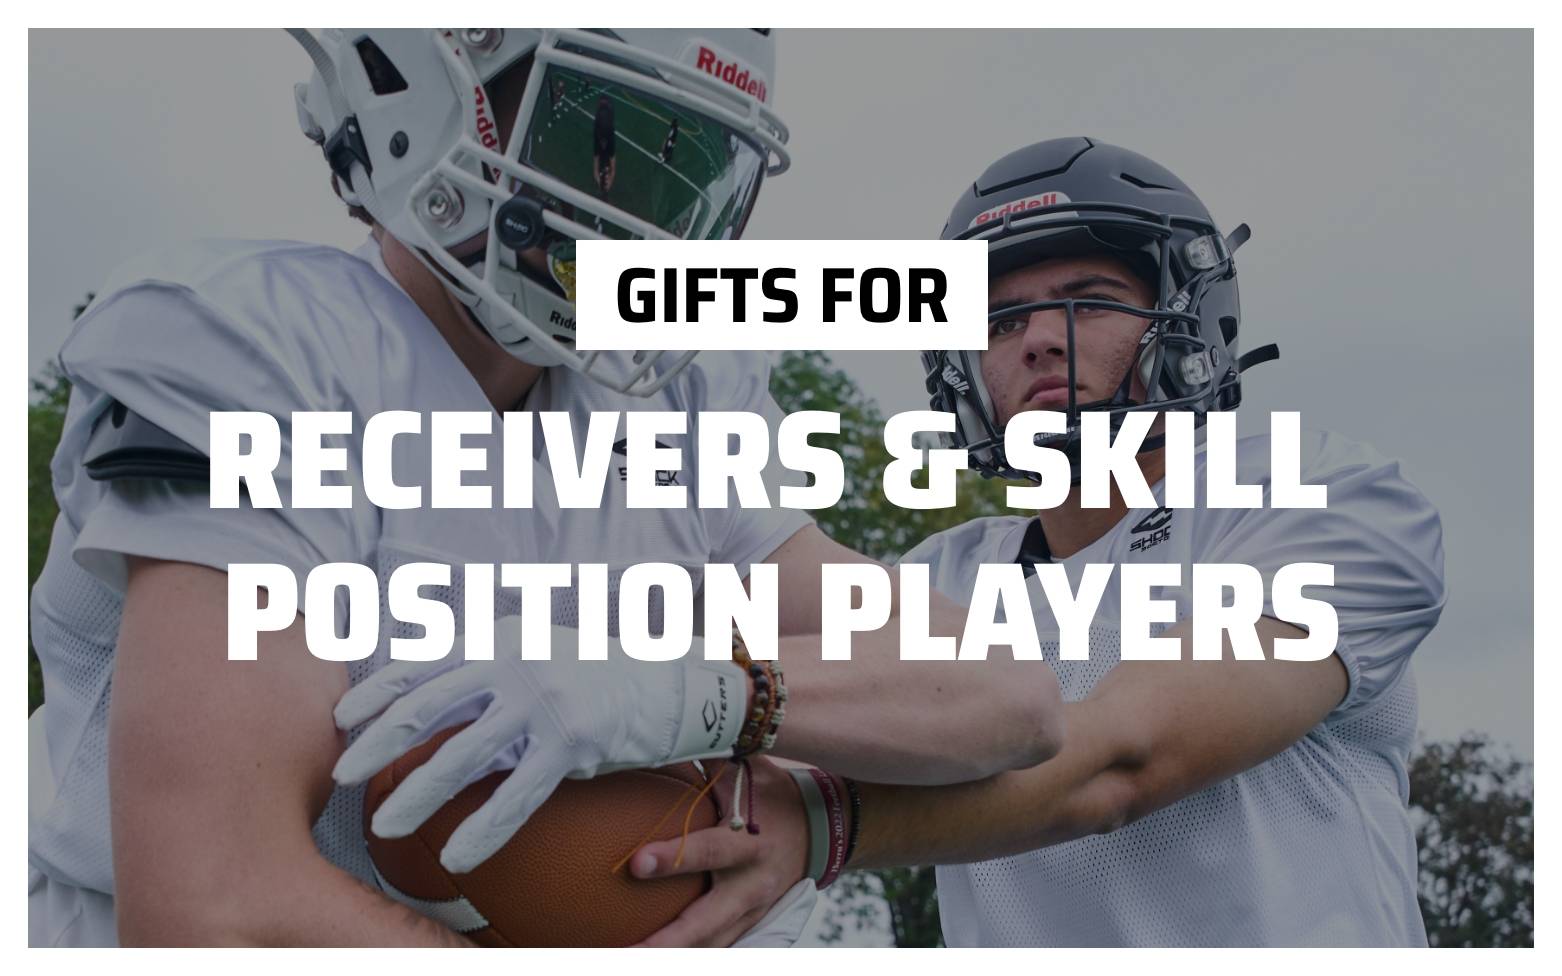 GIFTS FOR RECEIVERS & SKILL POISTION PLAYERS